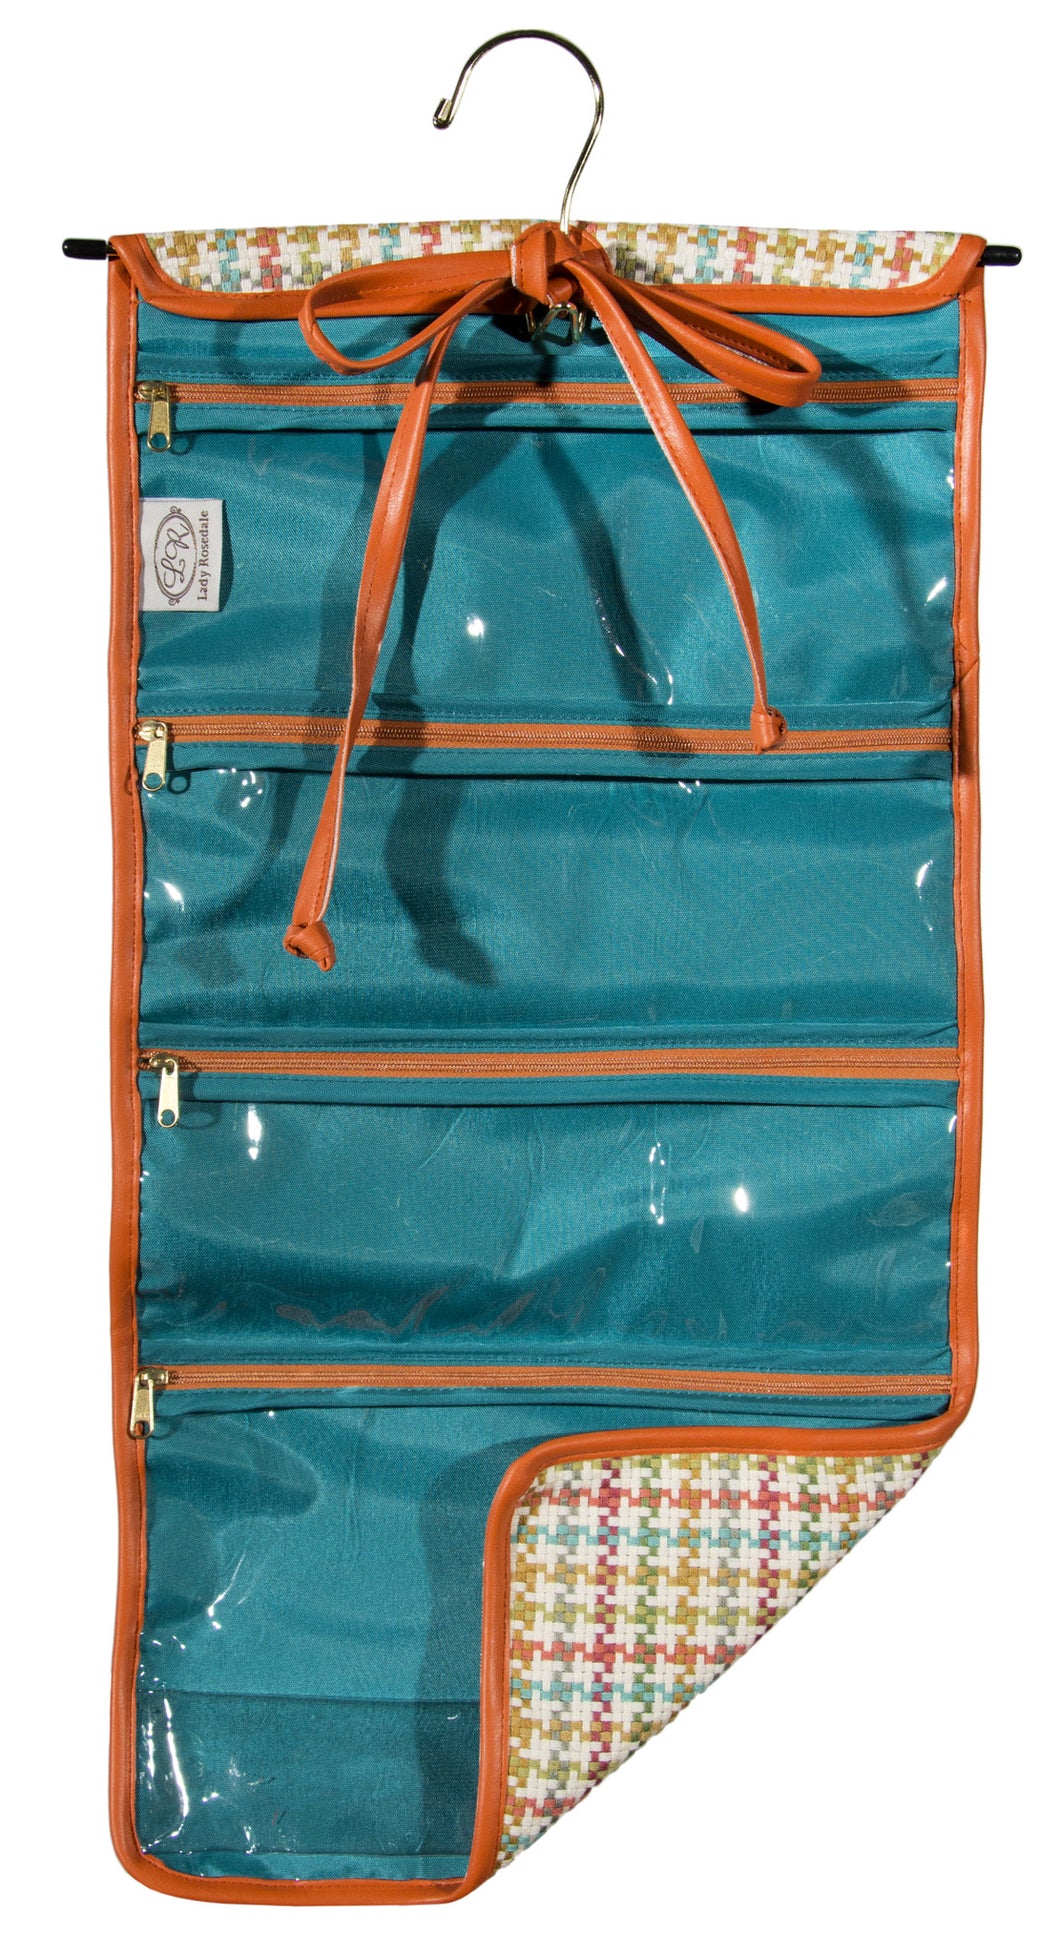 L153-3125 Hanging Cosmetic Chi Chi Coral, Comes with Metal Hanger, multiple Zippered Pockets, bottom expandable Pocket, Rolls and ties for easy travelling and to keep everything contained. Part of the Cosmetic and Travel Collection 12